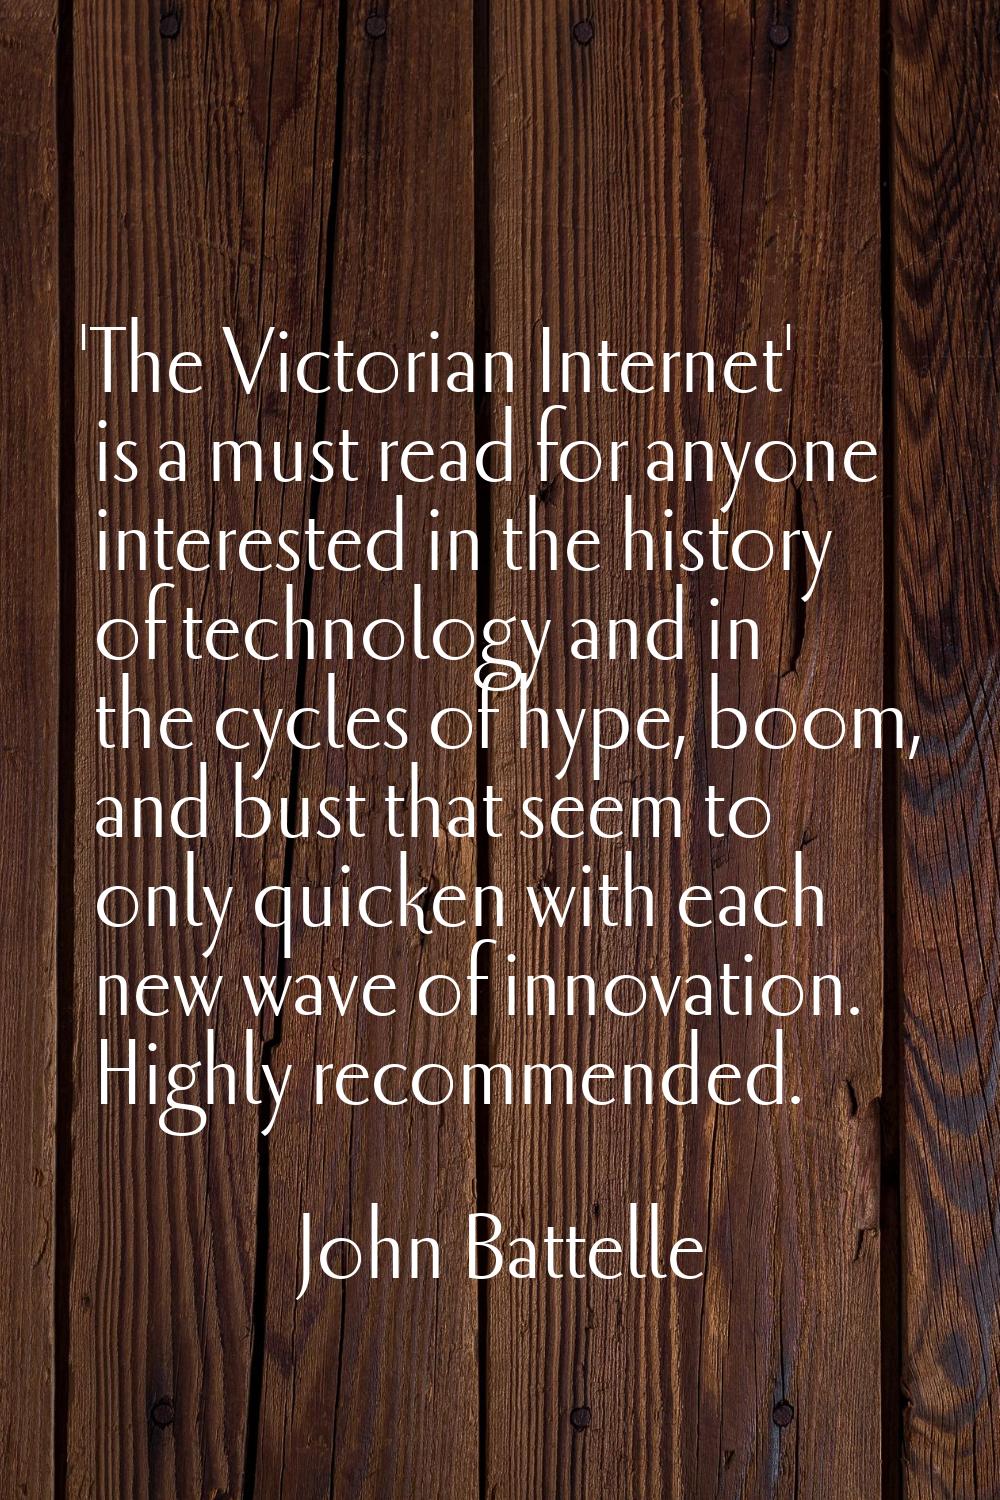 'The Victorian Internet' is a must read for anyone interested in the history of technology and in t